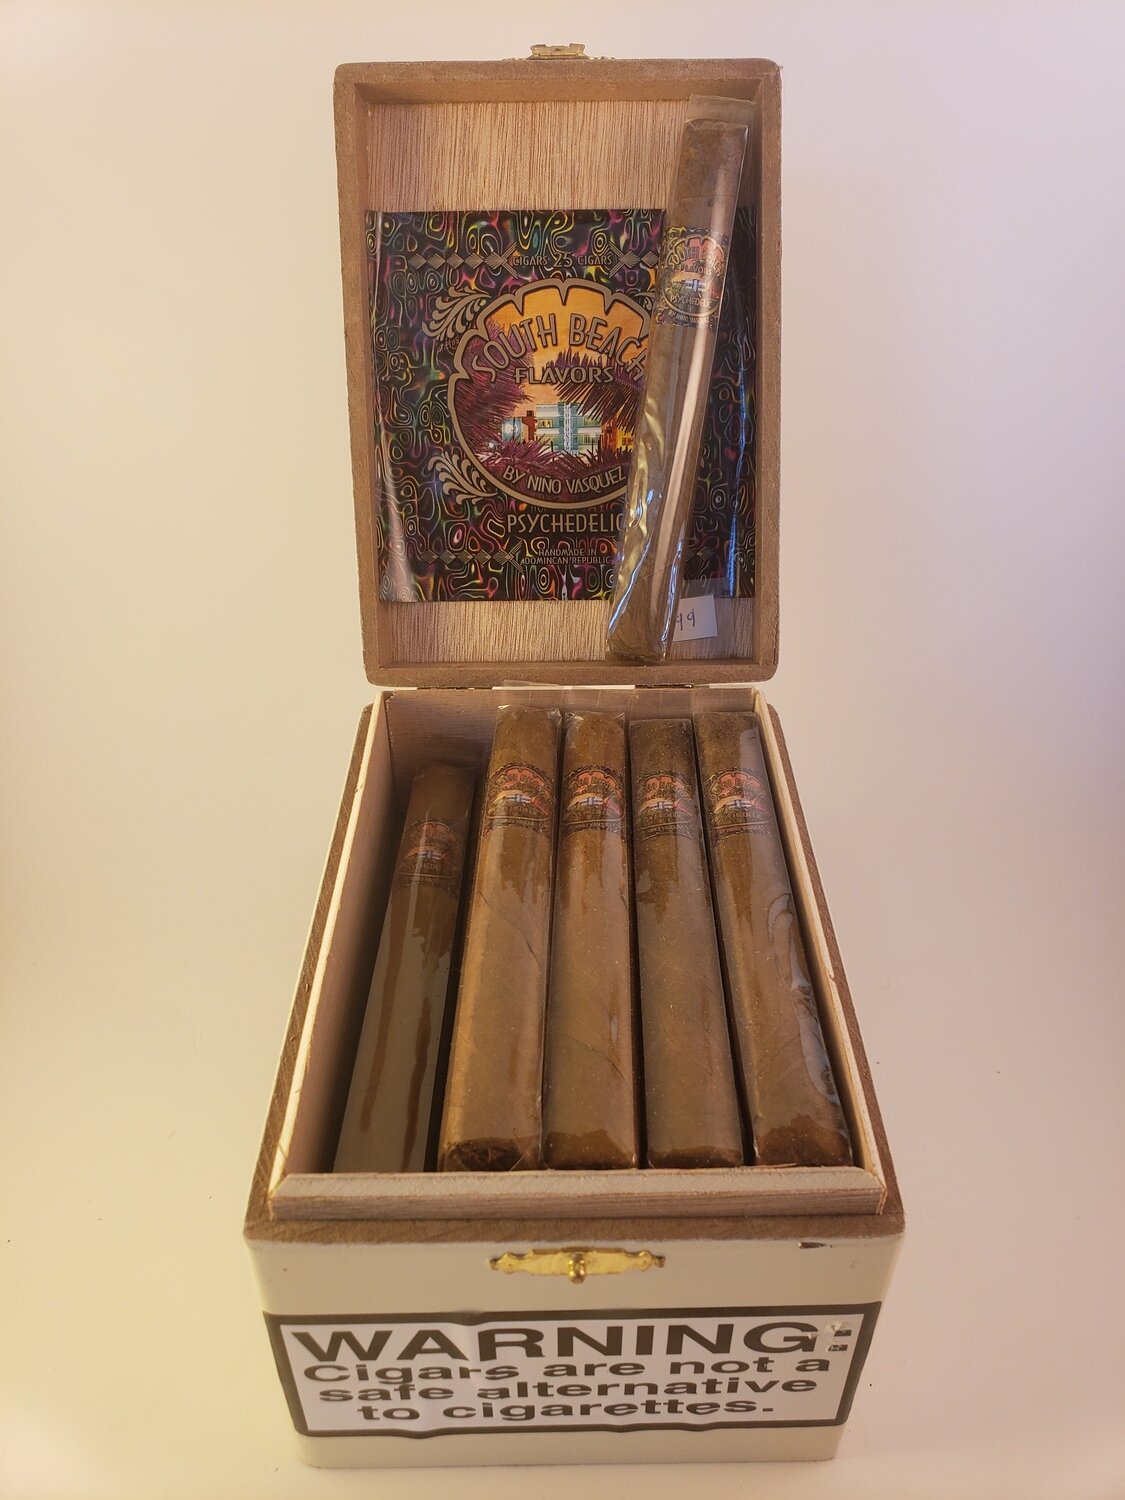 South Beach Flavors PSYCHEDELIC 5 x 42 Single Cigar